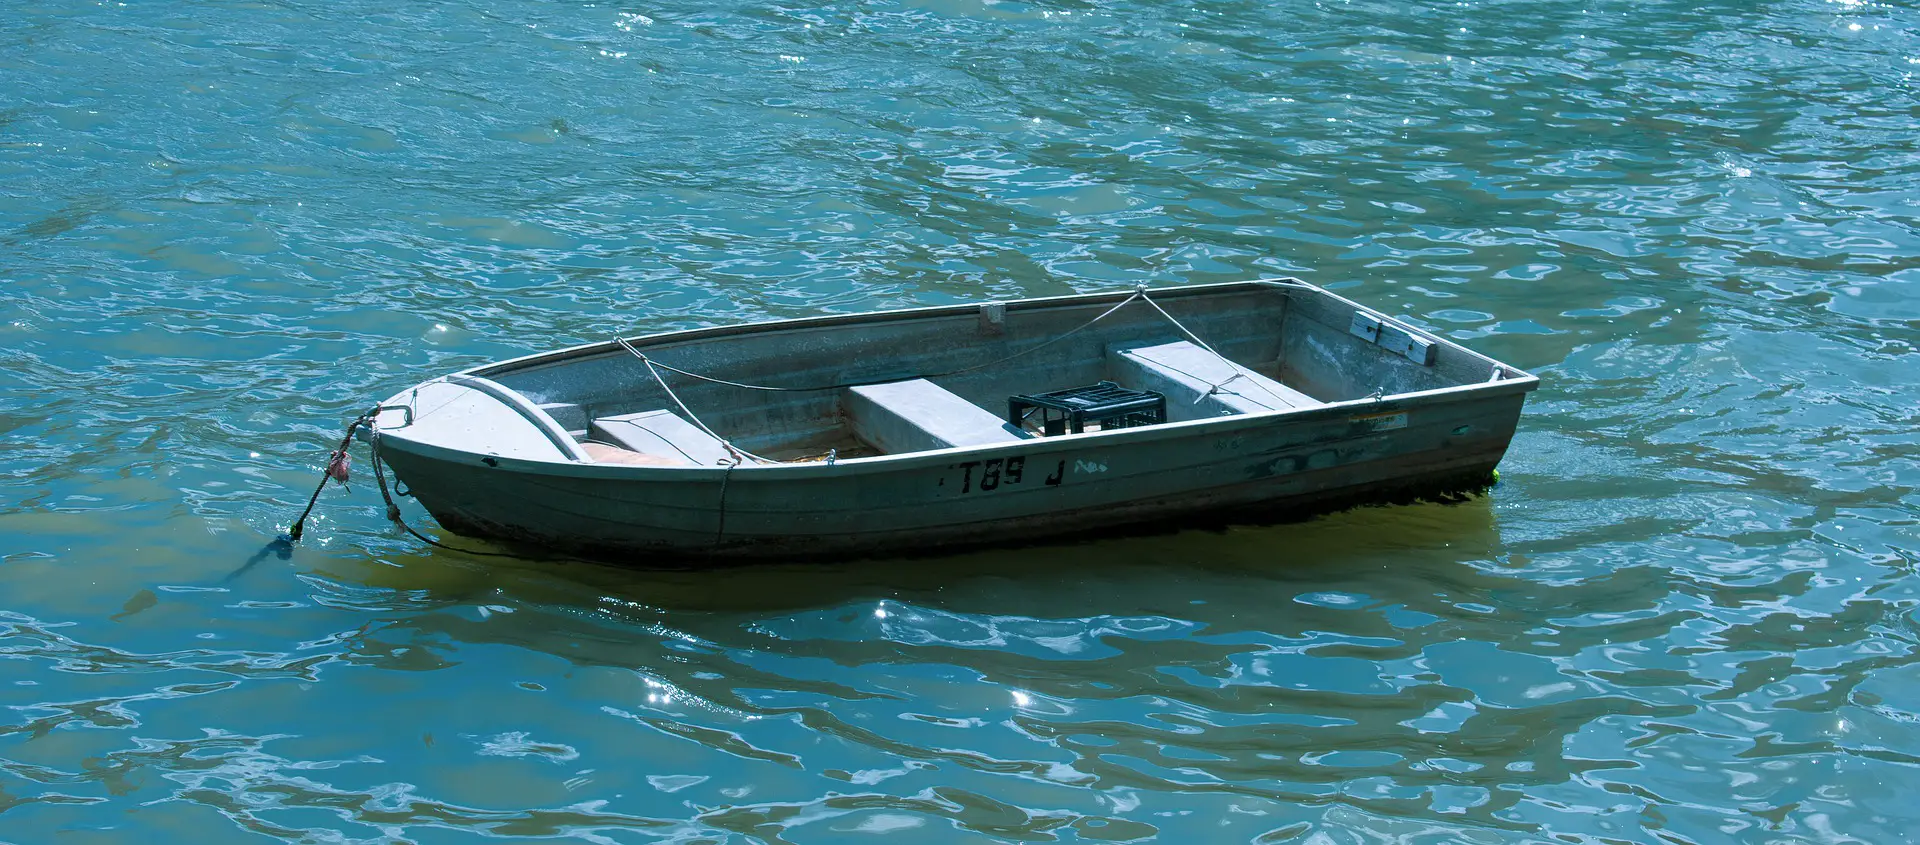 A row boat anchored offshore